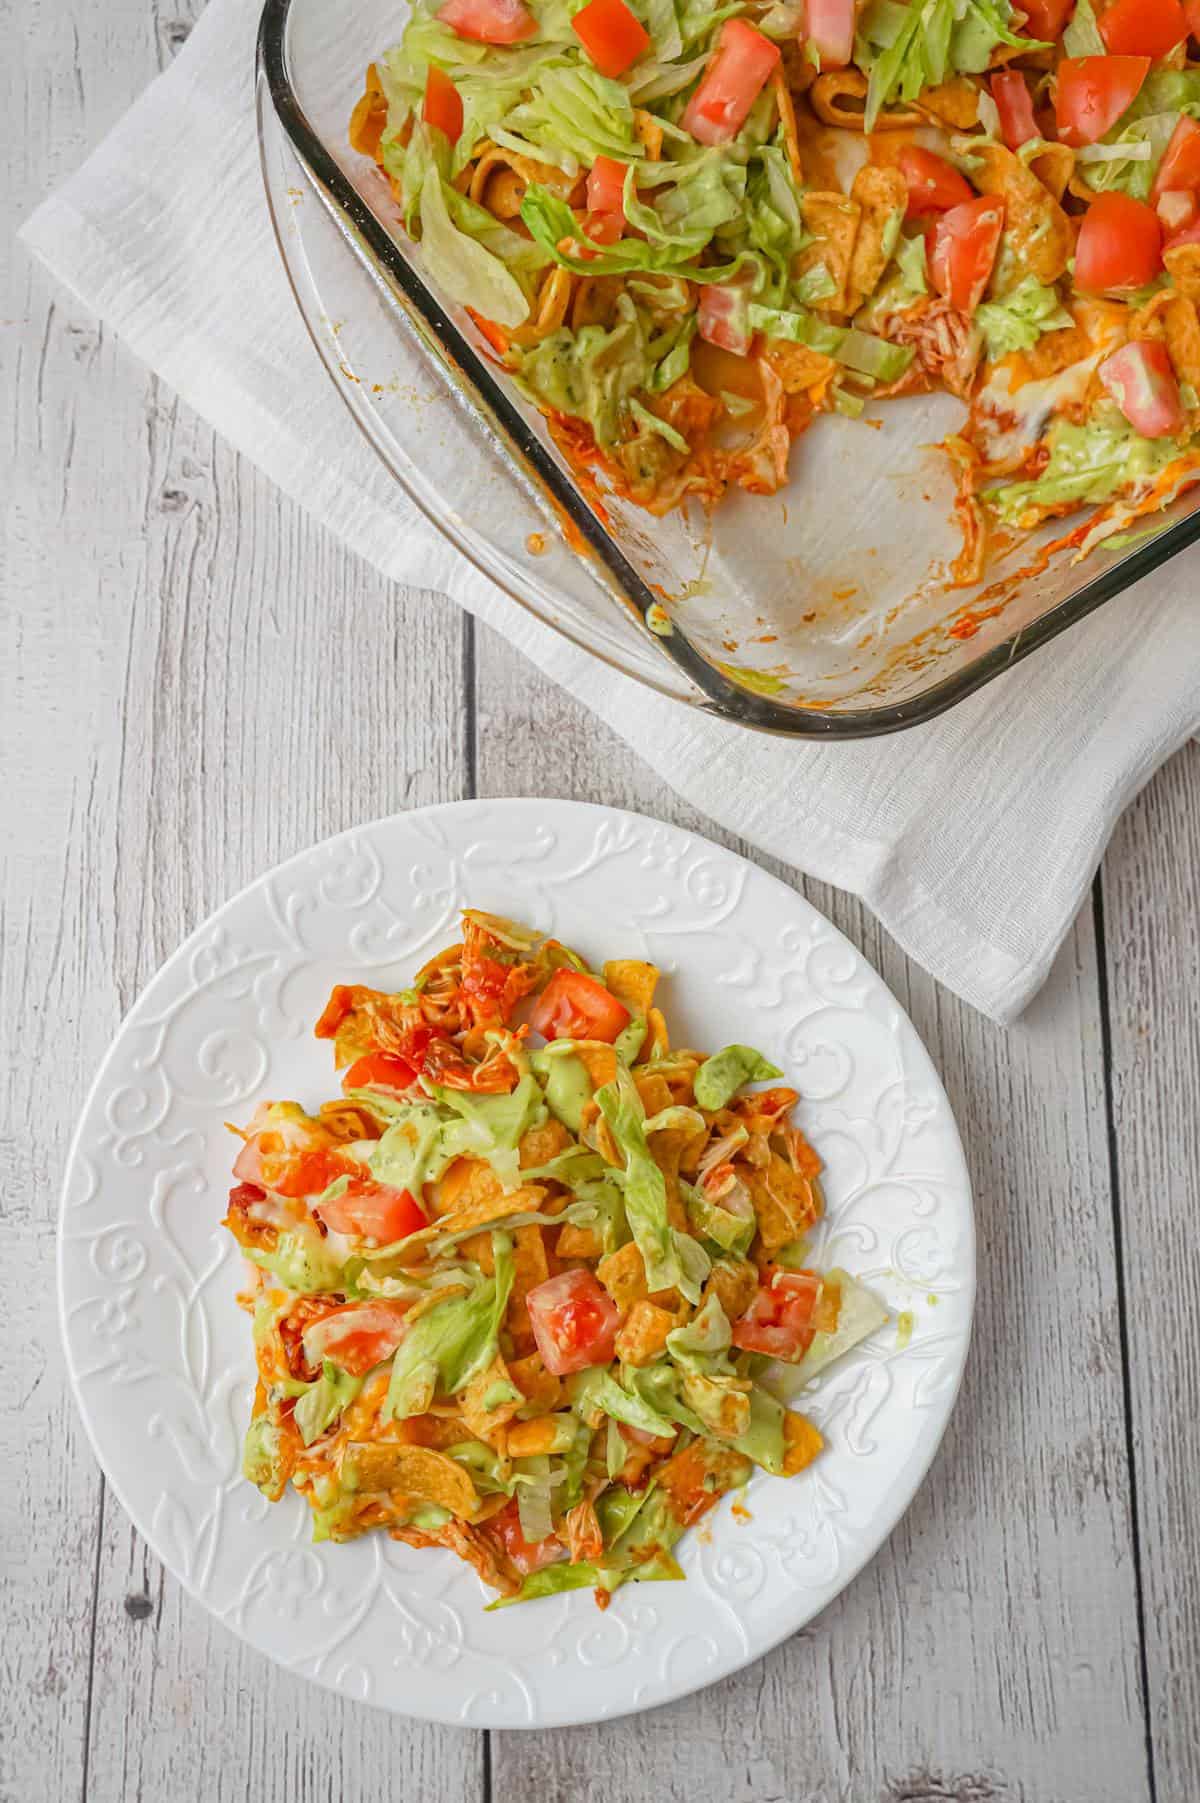 Chicken Taco Frito Pie is an easy weeknight dinner recipe made with shredded chicken tossed in salsa, taco seasoning and chili sauce and topped with cheese, Fritos corn chips, avocado dip, shredded lettuce and diced tomatoes.